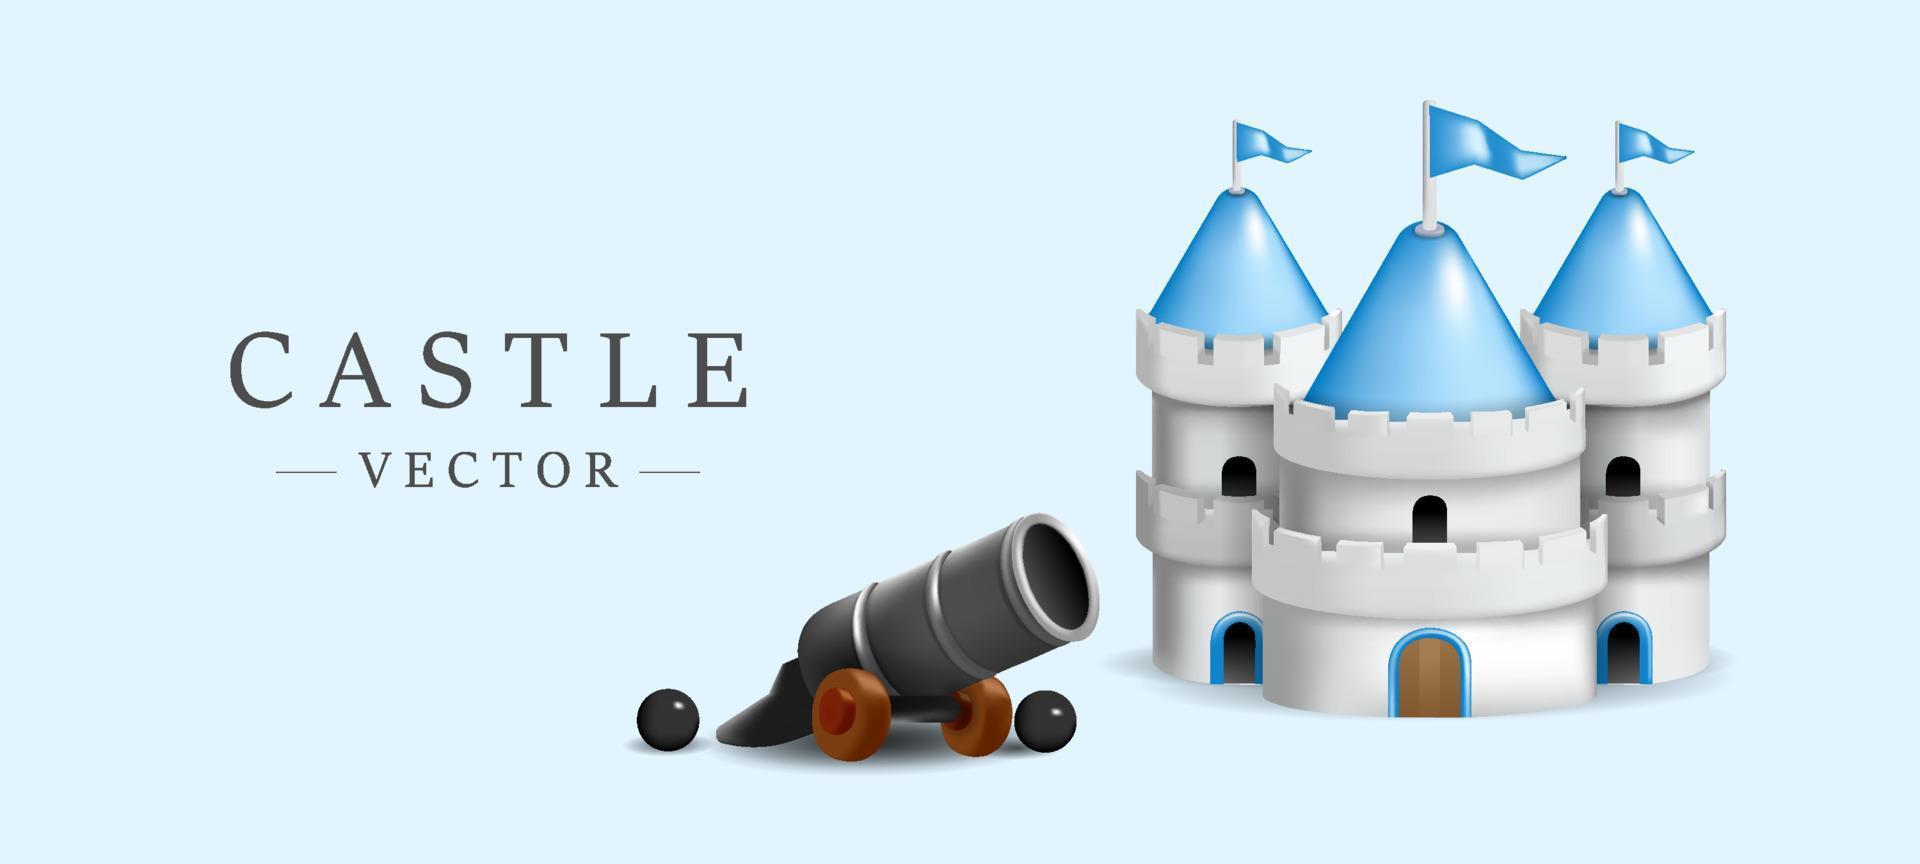 Cute castle 3d model with mini cannon  vector illustration on sky blue background